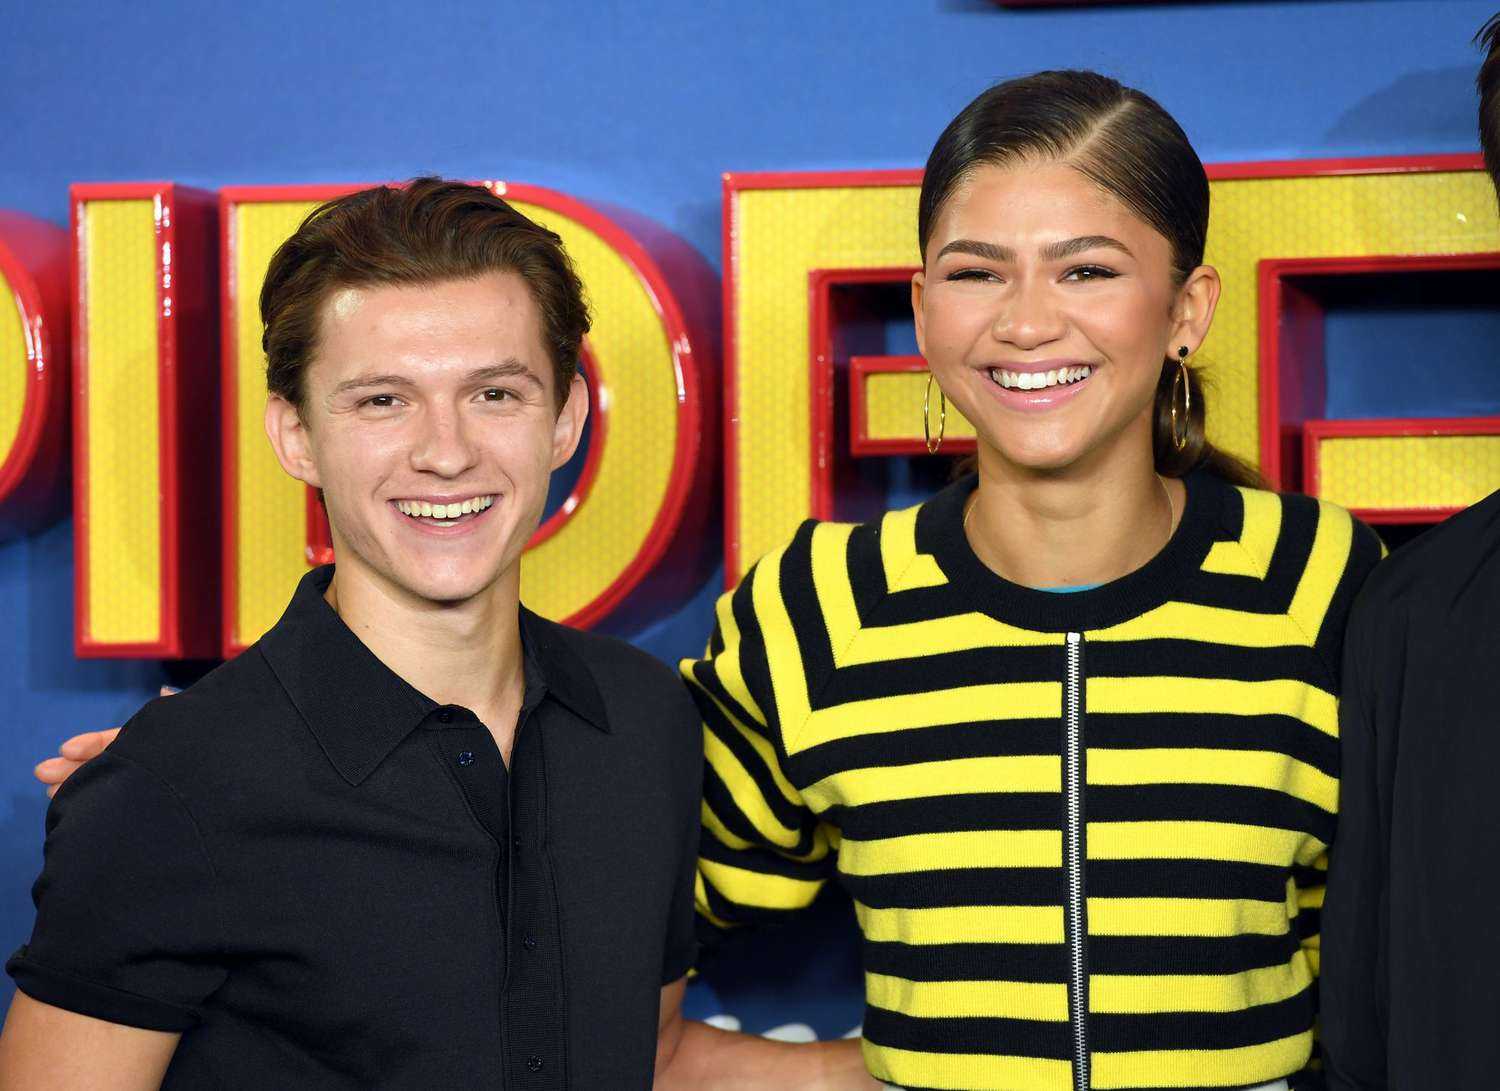 Tom Holland And Zendaya S Romance A Year After The Praise The Kiss And The Virgo Connection